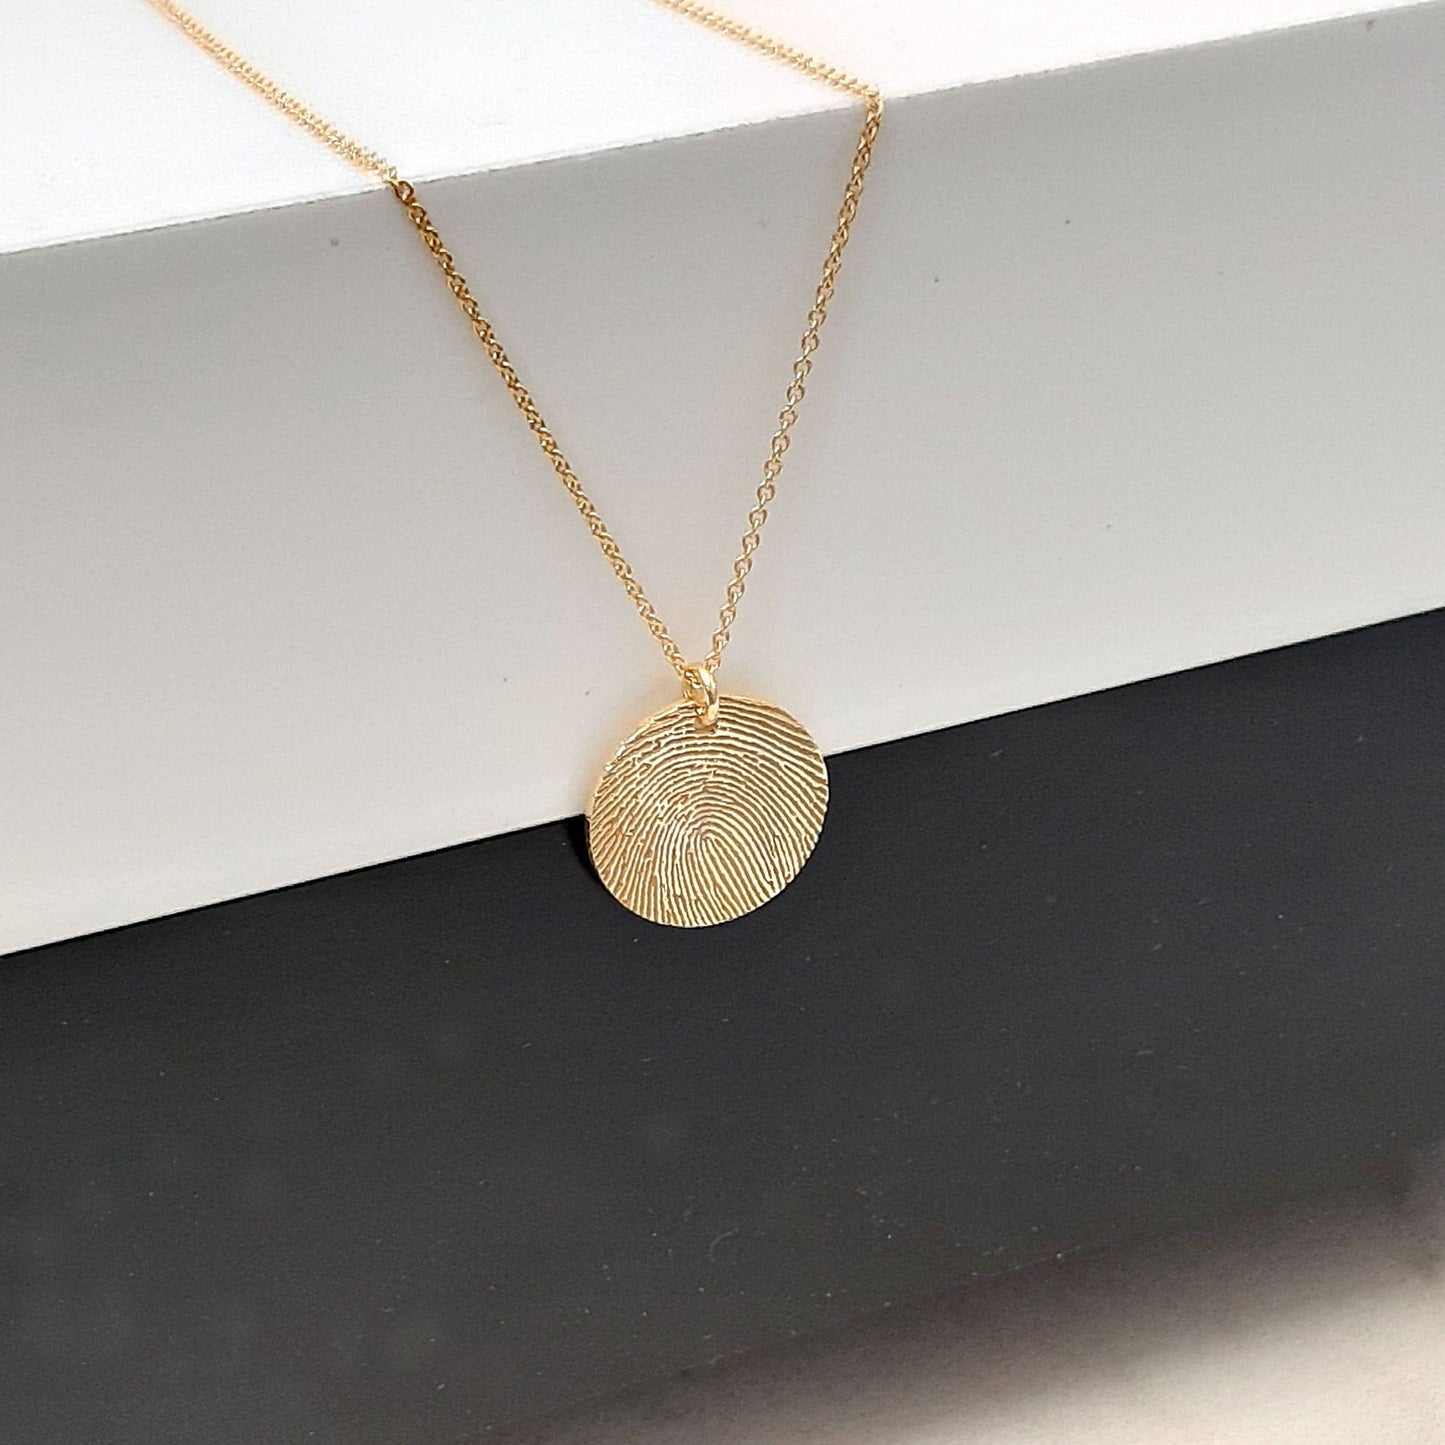 14k Solid Yellow Gold  Fingerprint Necklace ,  Memorial Gifts,  Memorial Jewelry,  Keepsake Gifts, Remembrance Gift , sympathy gift for her